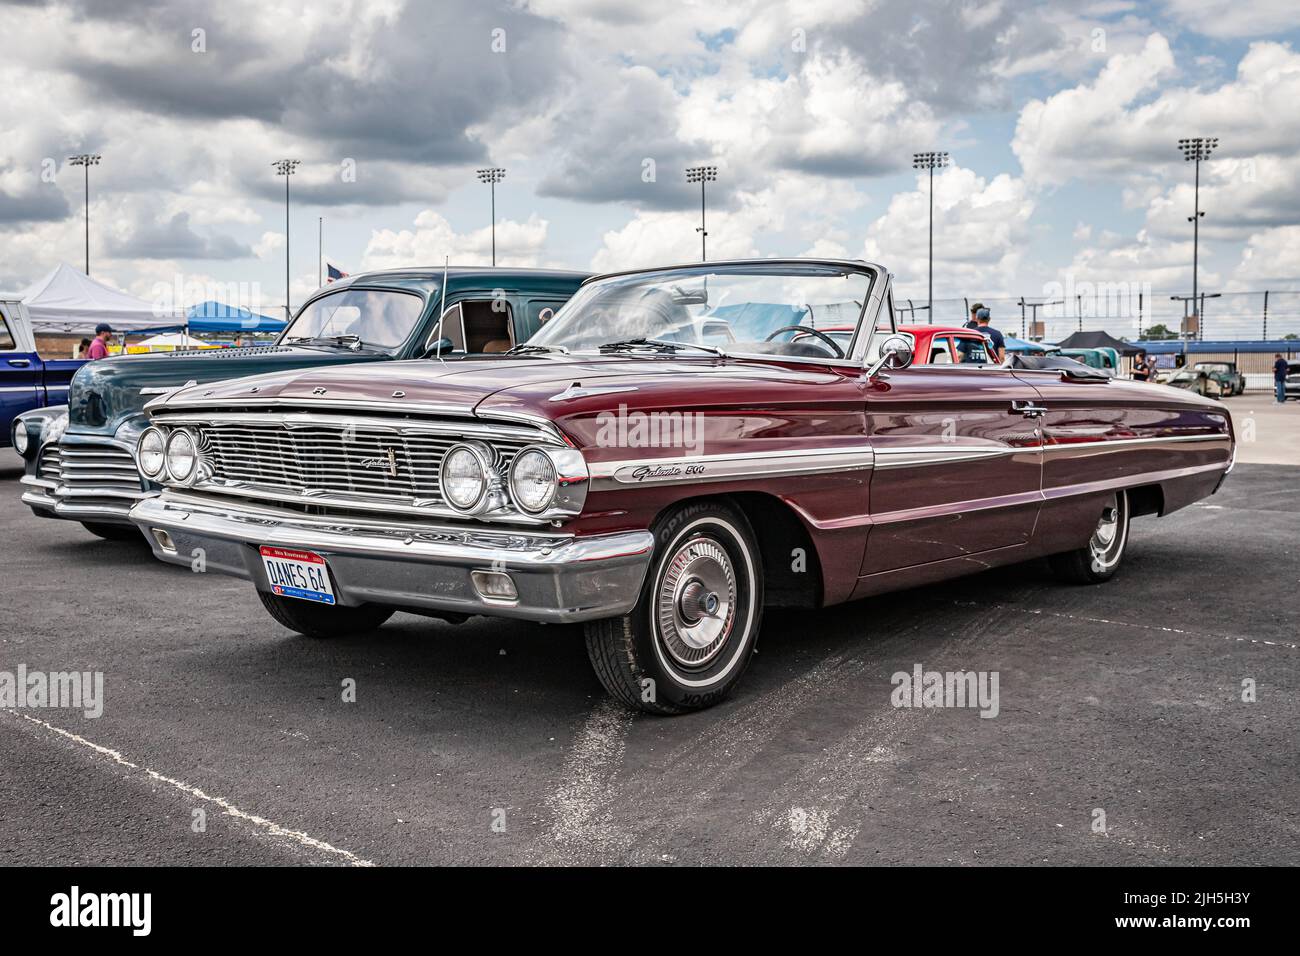 Lebanon, TN - May 14, 2022: Low perspective front corner view of a 1964 Ford Galaxie 500 Convertible at a local car show. Stock Photo